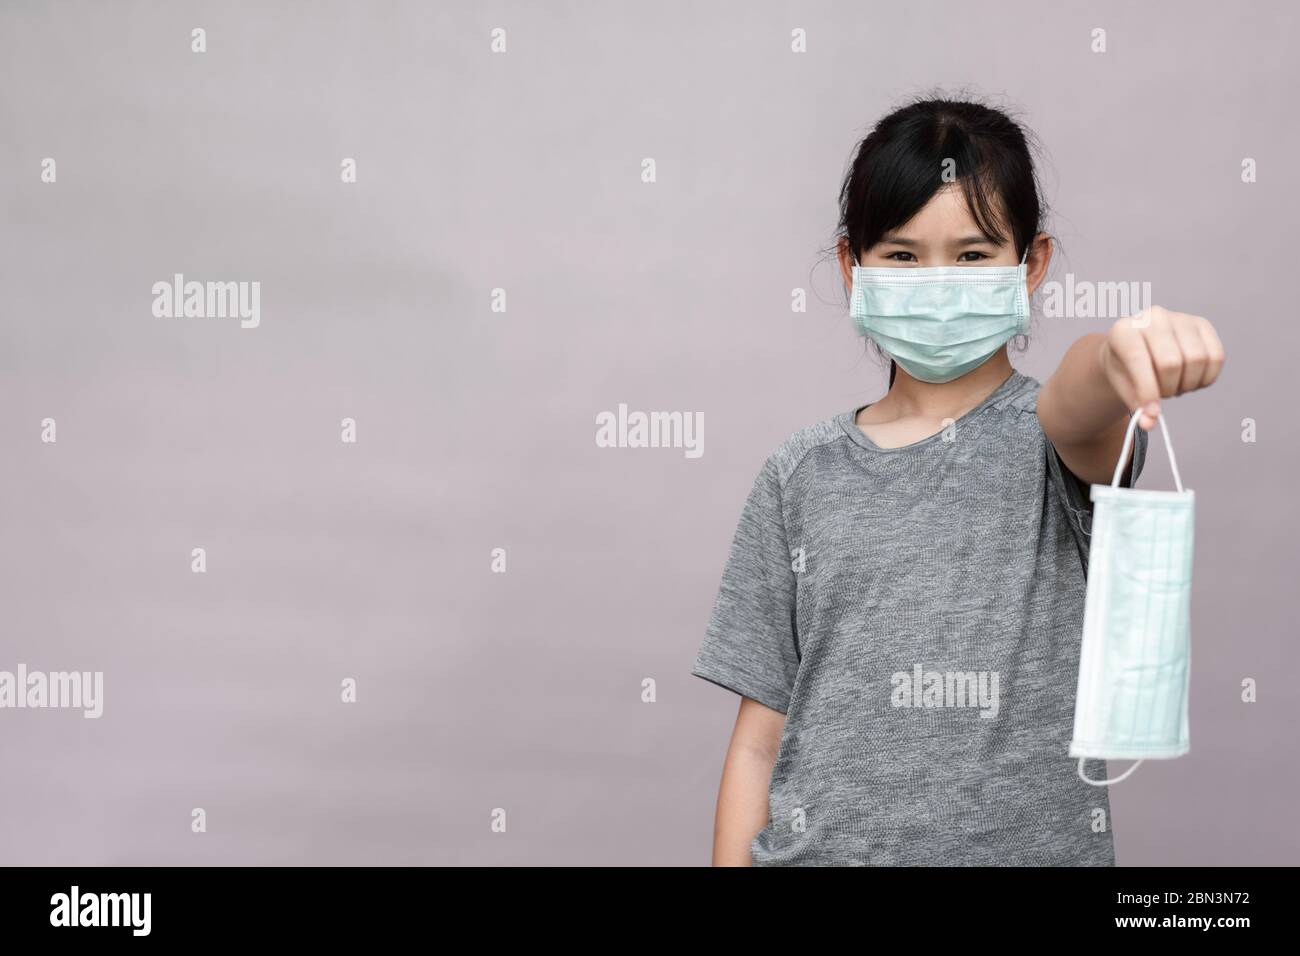 Little girl has sterile medical  mask protect herself from Coronavirus COVID-19 isolated on gray background, child with a mask on her nose for safety Stock Photo